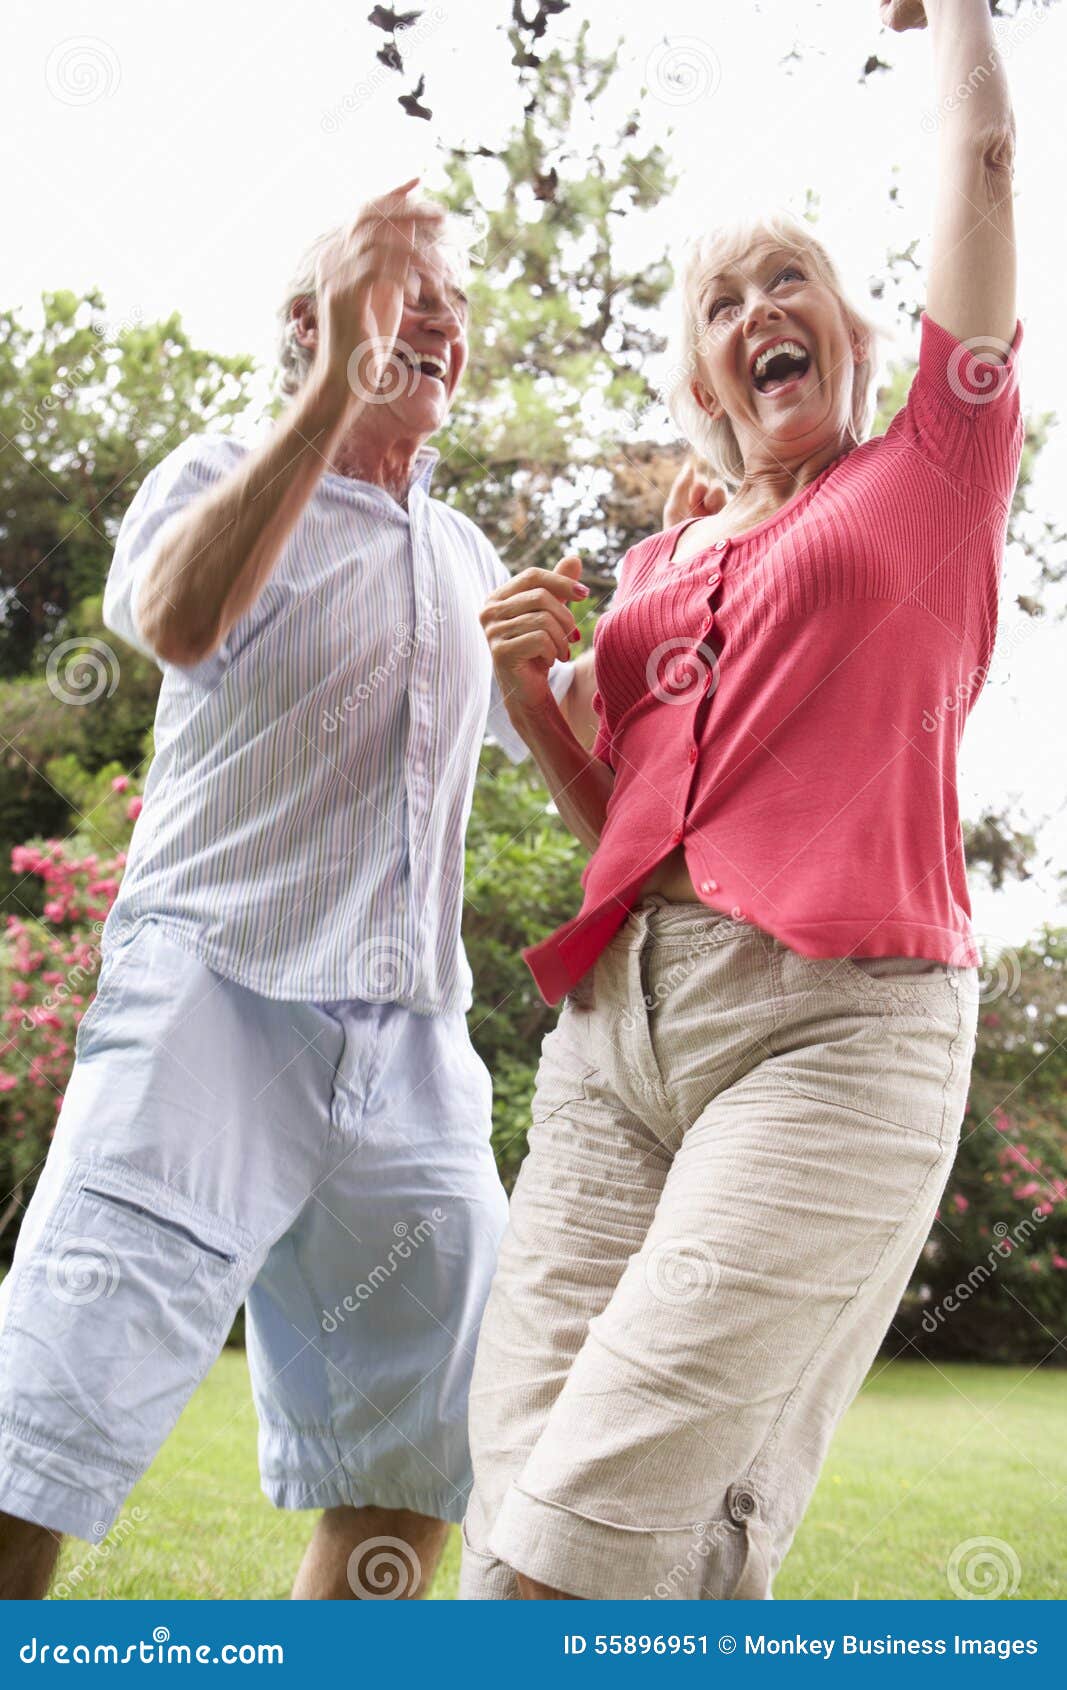 Energetic Senior Couple In Countryside Stock Image Image Of Summer